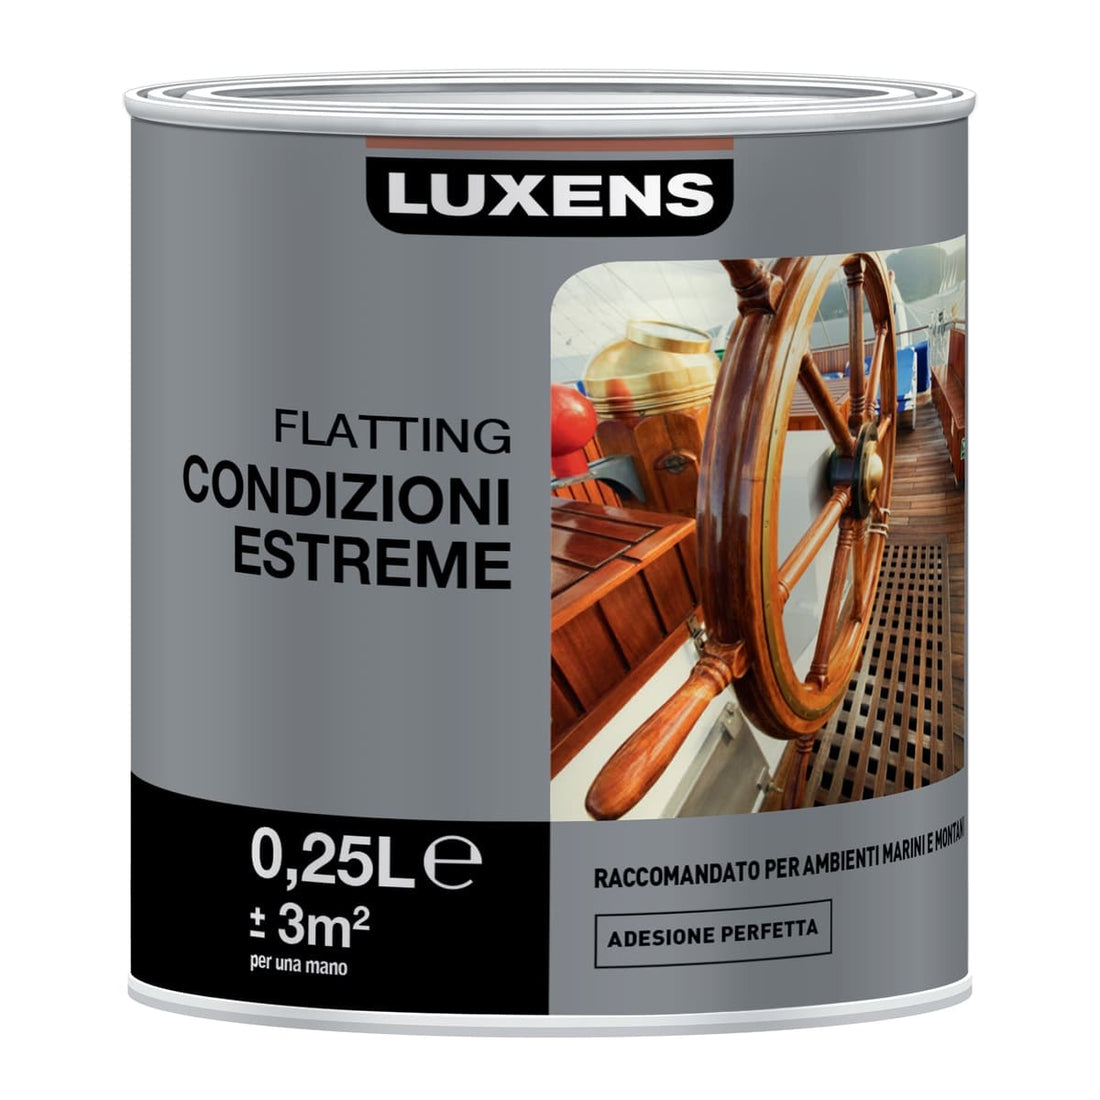 SOLVENT-BASED EXTREME CLIMATE FLATTING 250ML LUXENS - best price from Maltashopper.com BR470001904